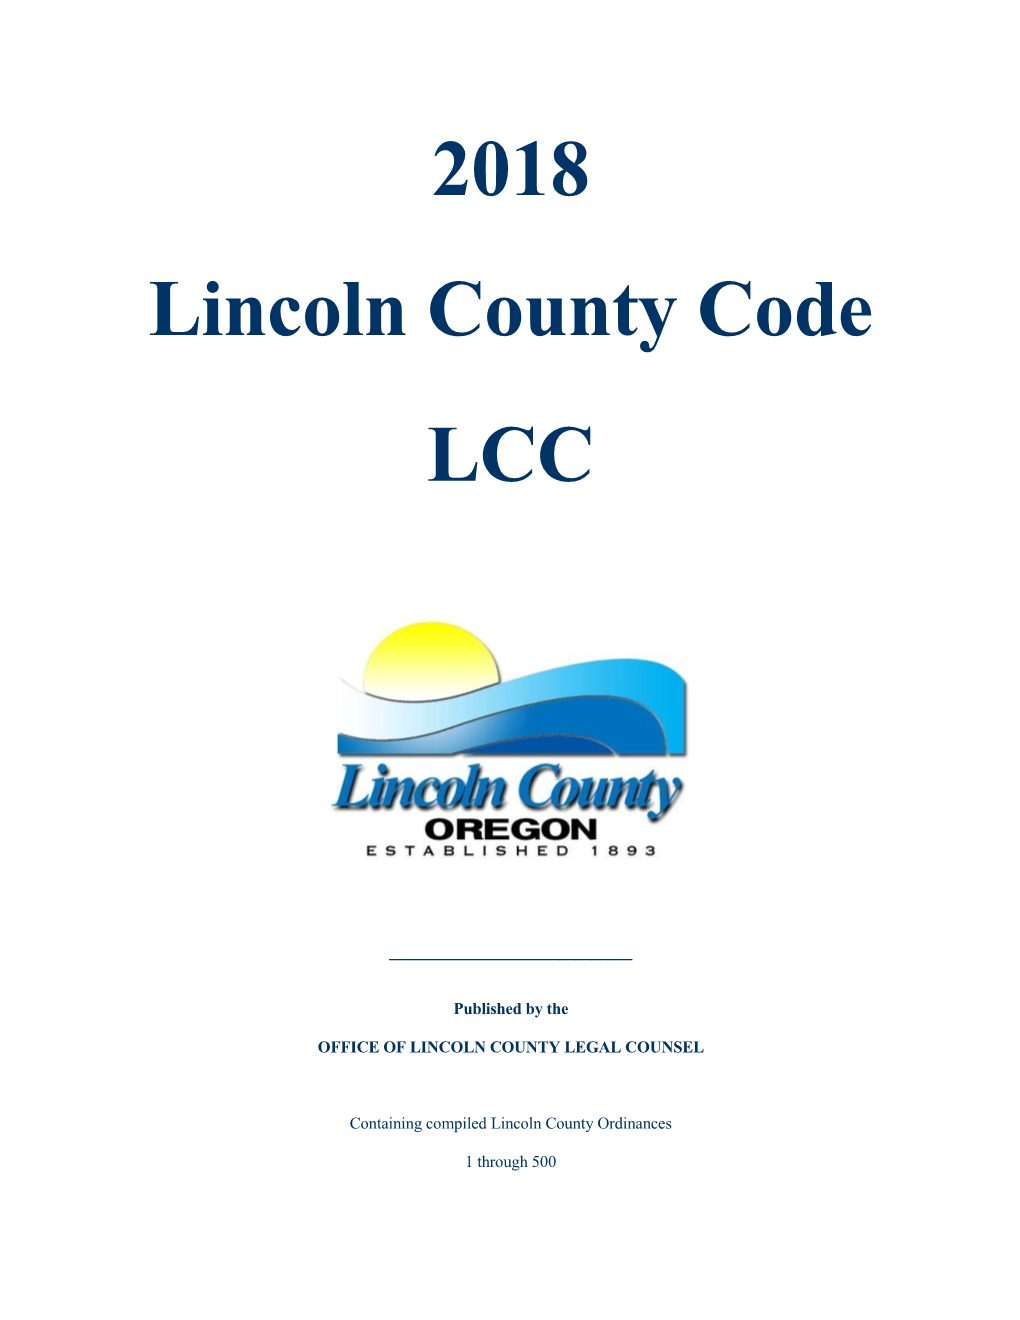 2018 Lincoln County Code (LCC)